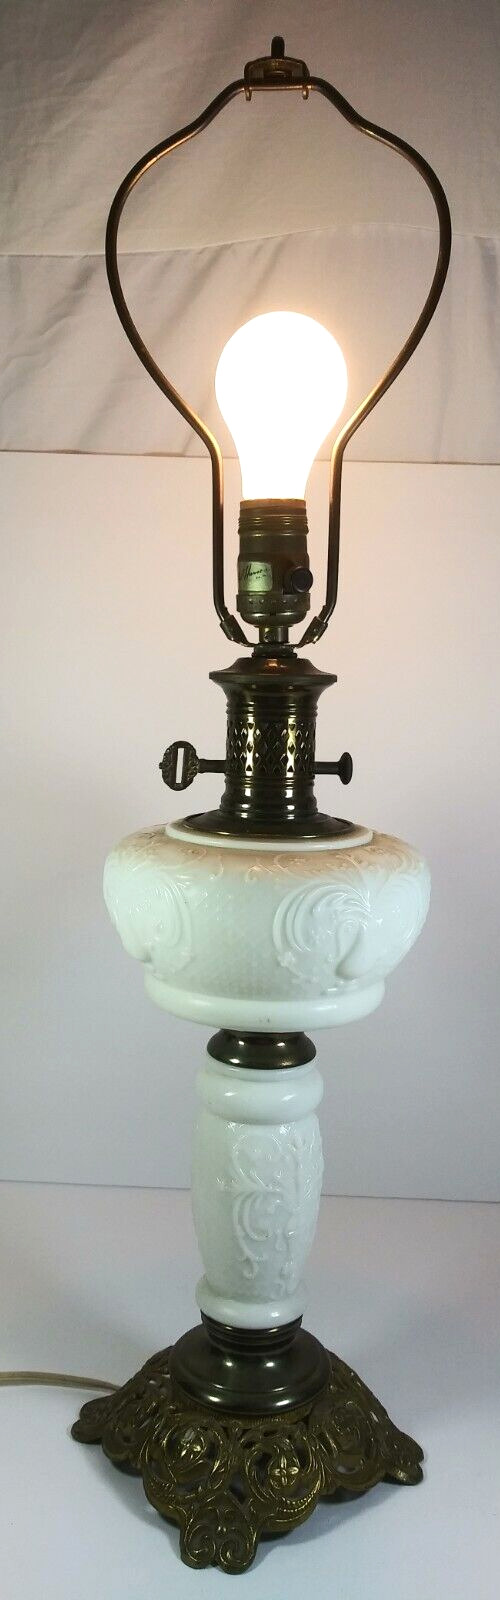 PAUL HANSON White Milk GLASS & BRASS ELECTRIC TABLE LAMP 3-WAY TESTED